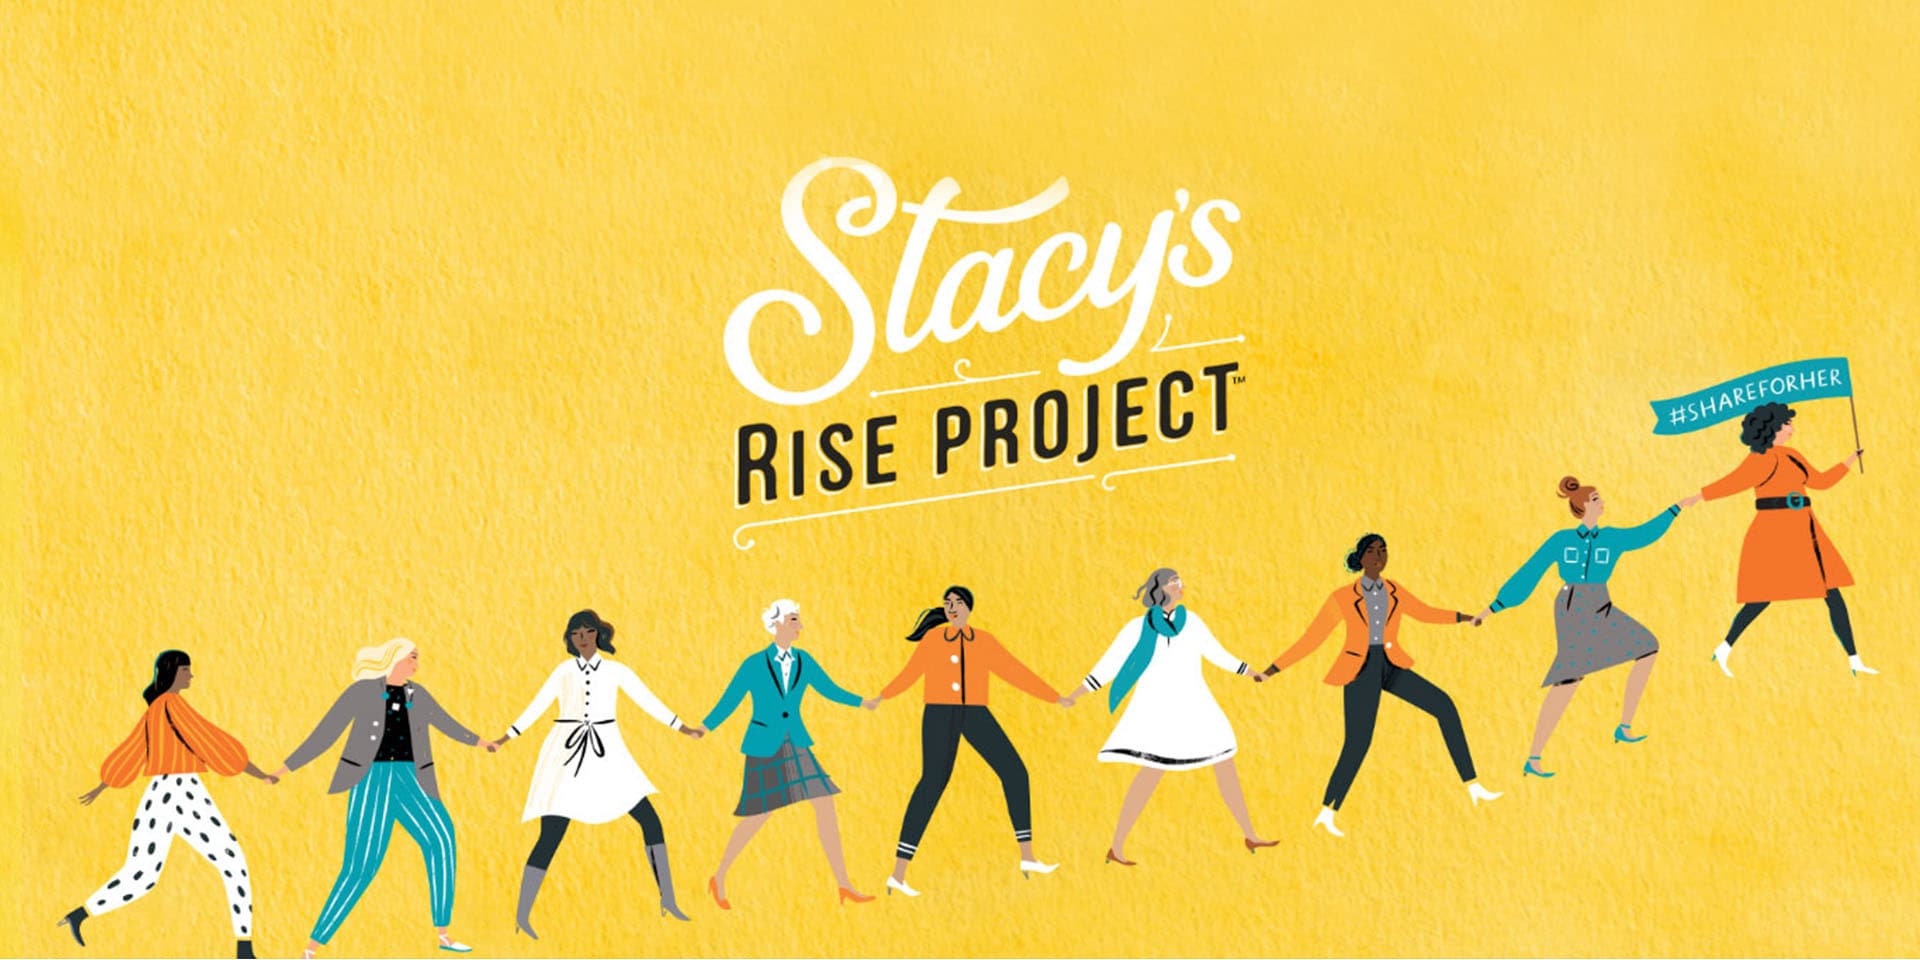 Stacy’s Helps Women Rise